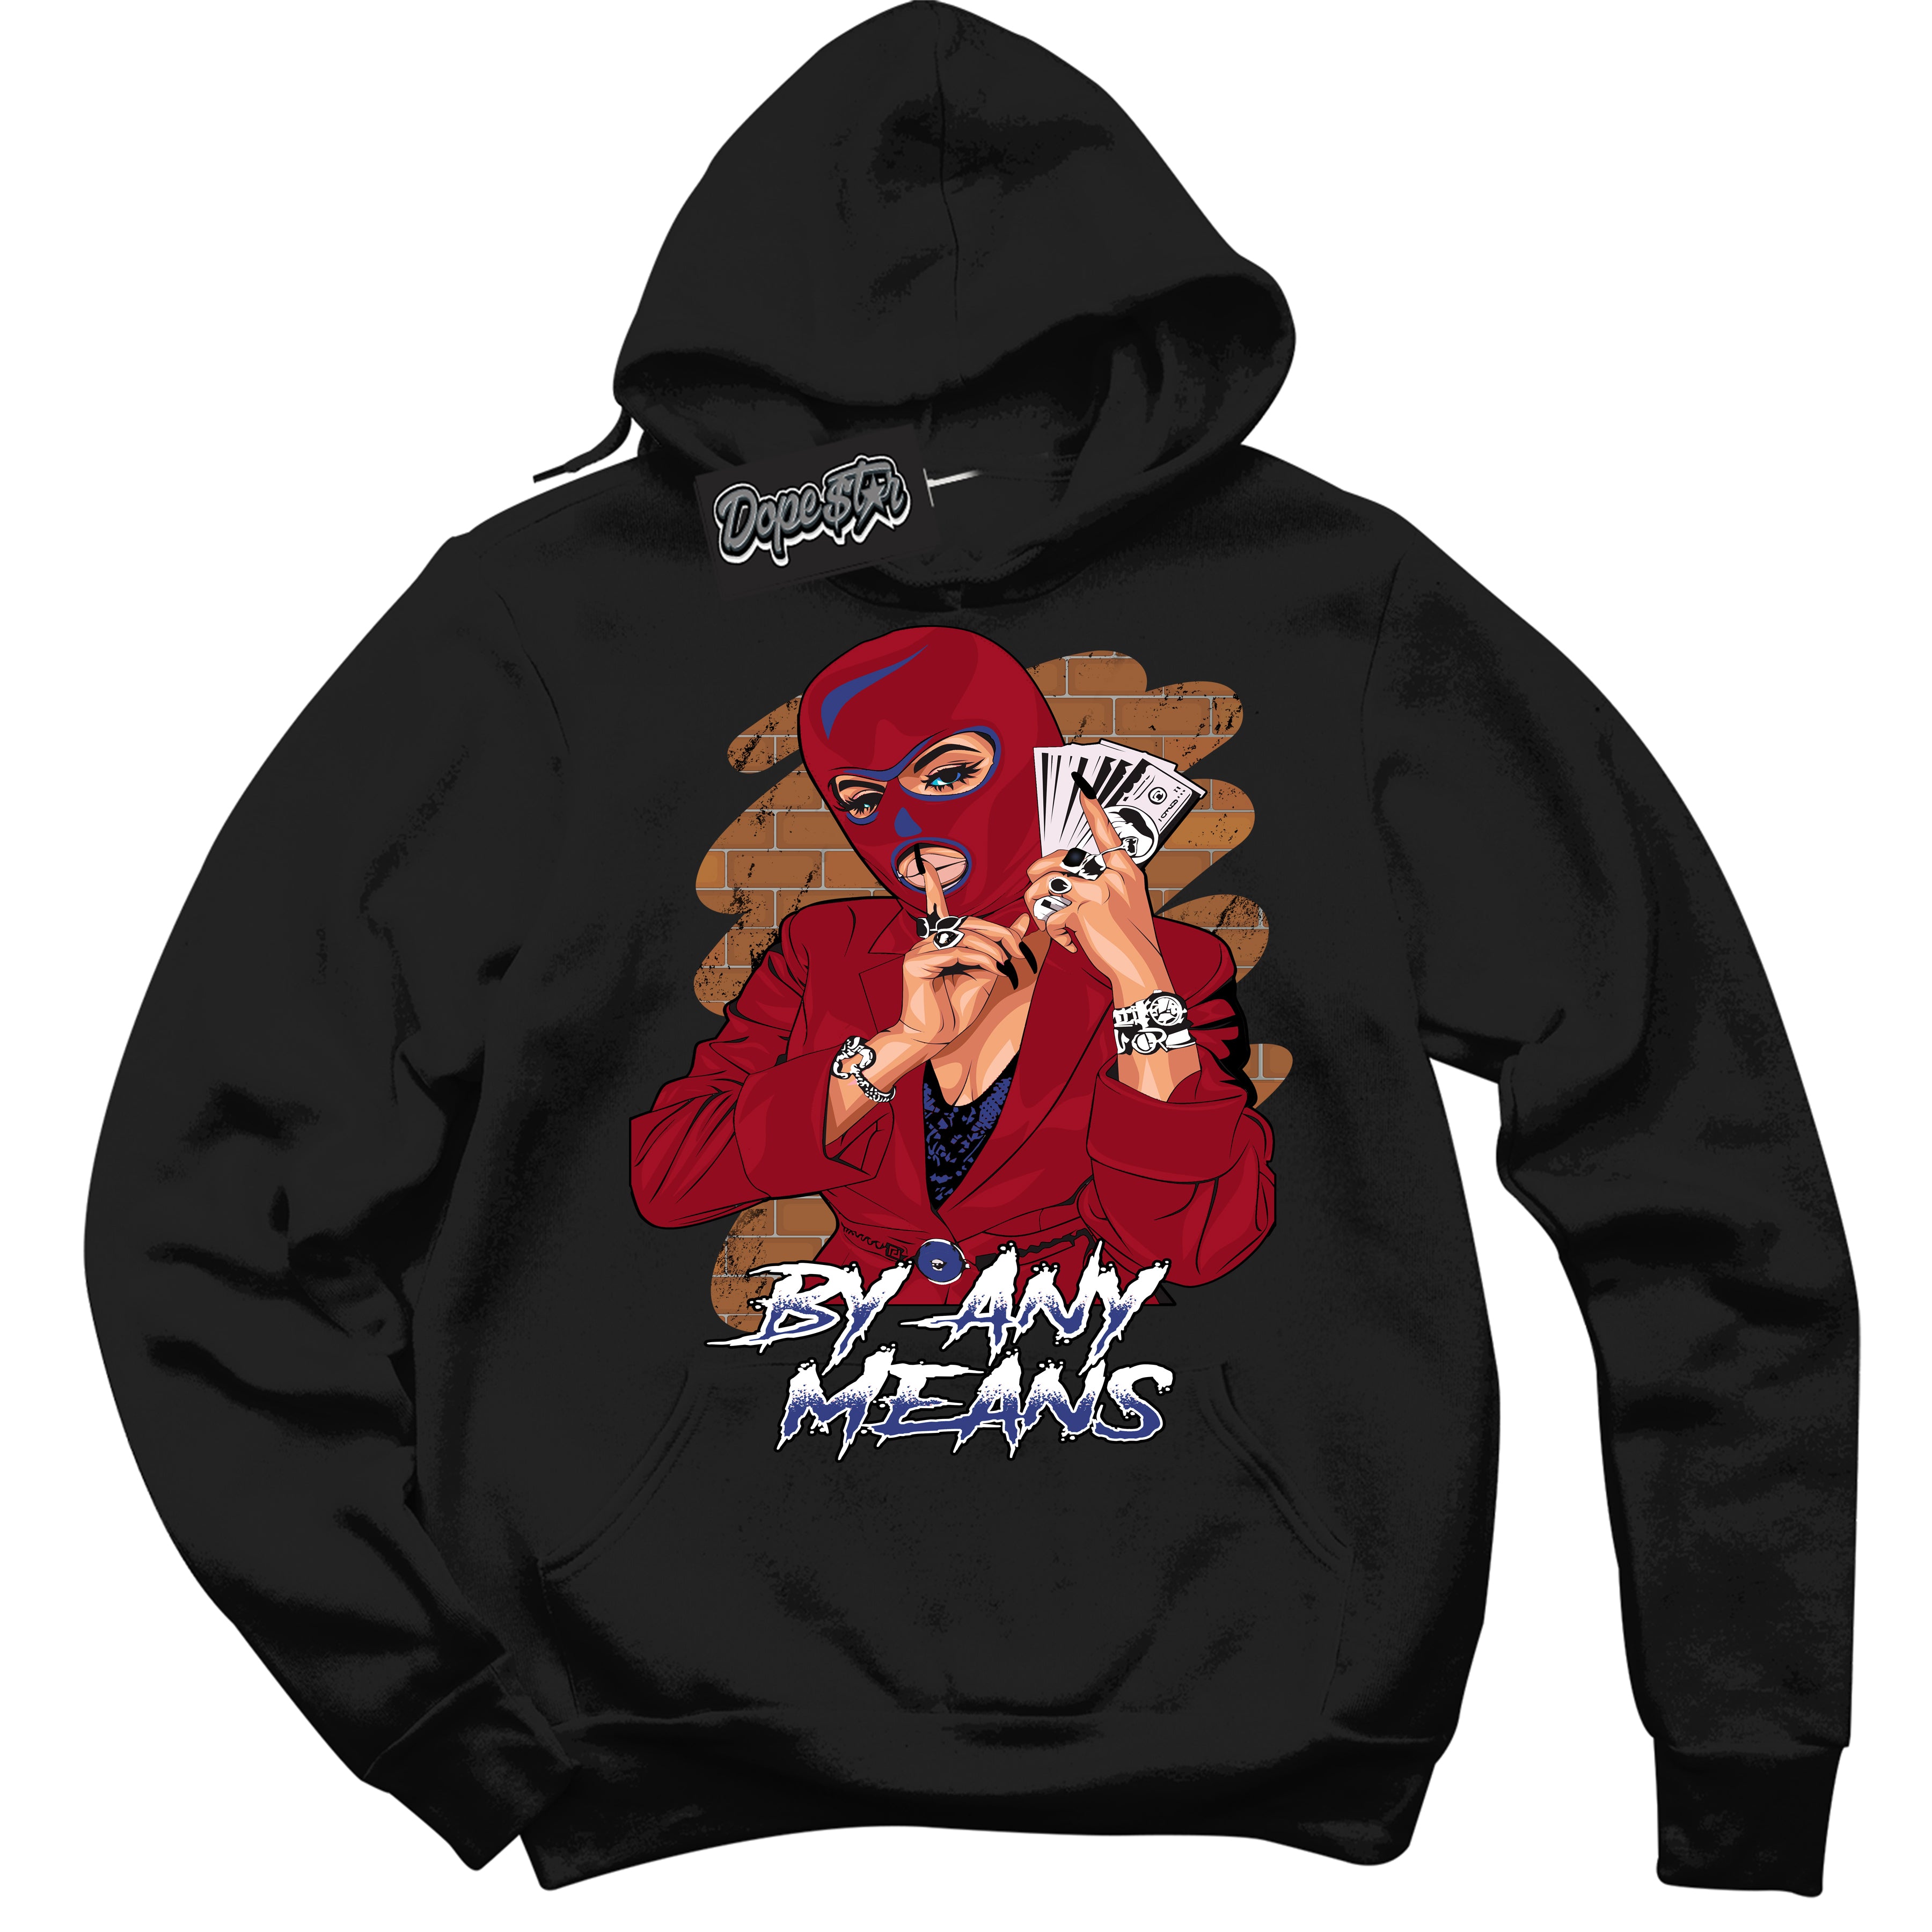 Cool Black Hoodie with “ By Any Means ”  design that Perfectly Matches Playoffs 8s Sneakers.